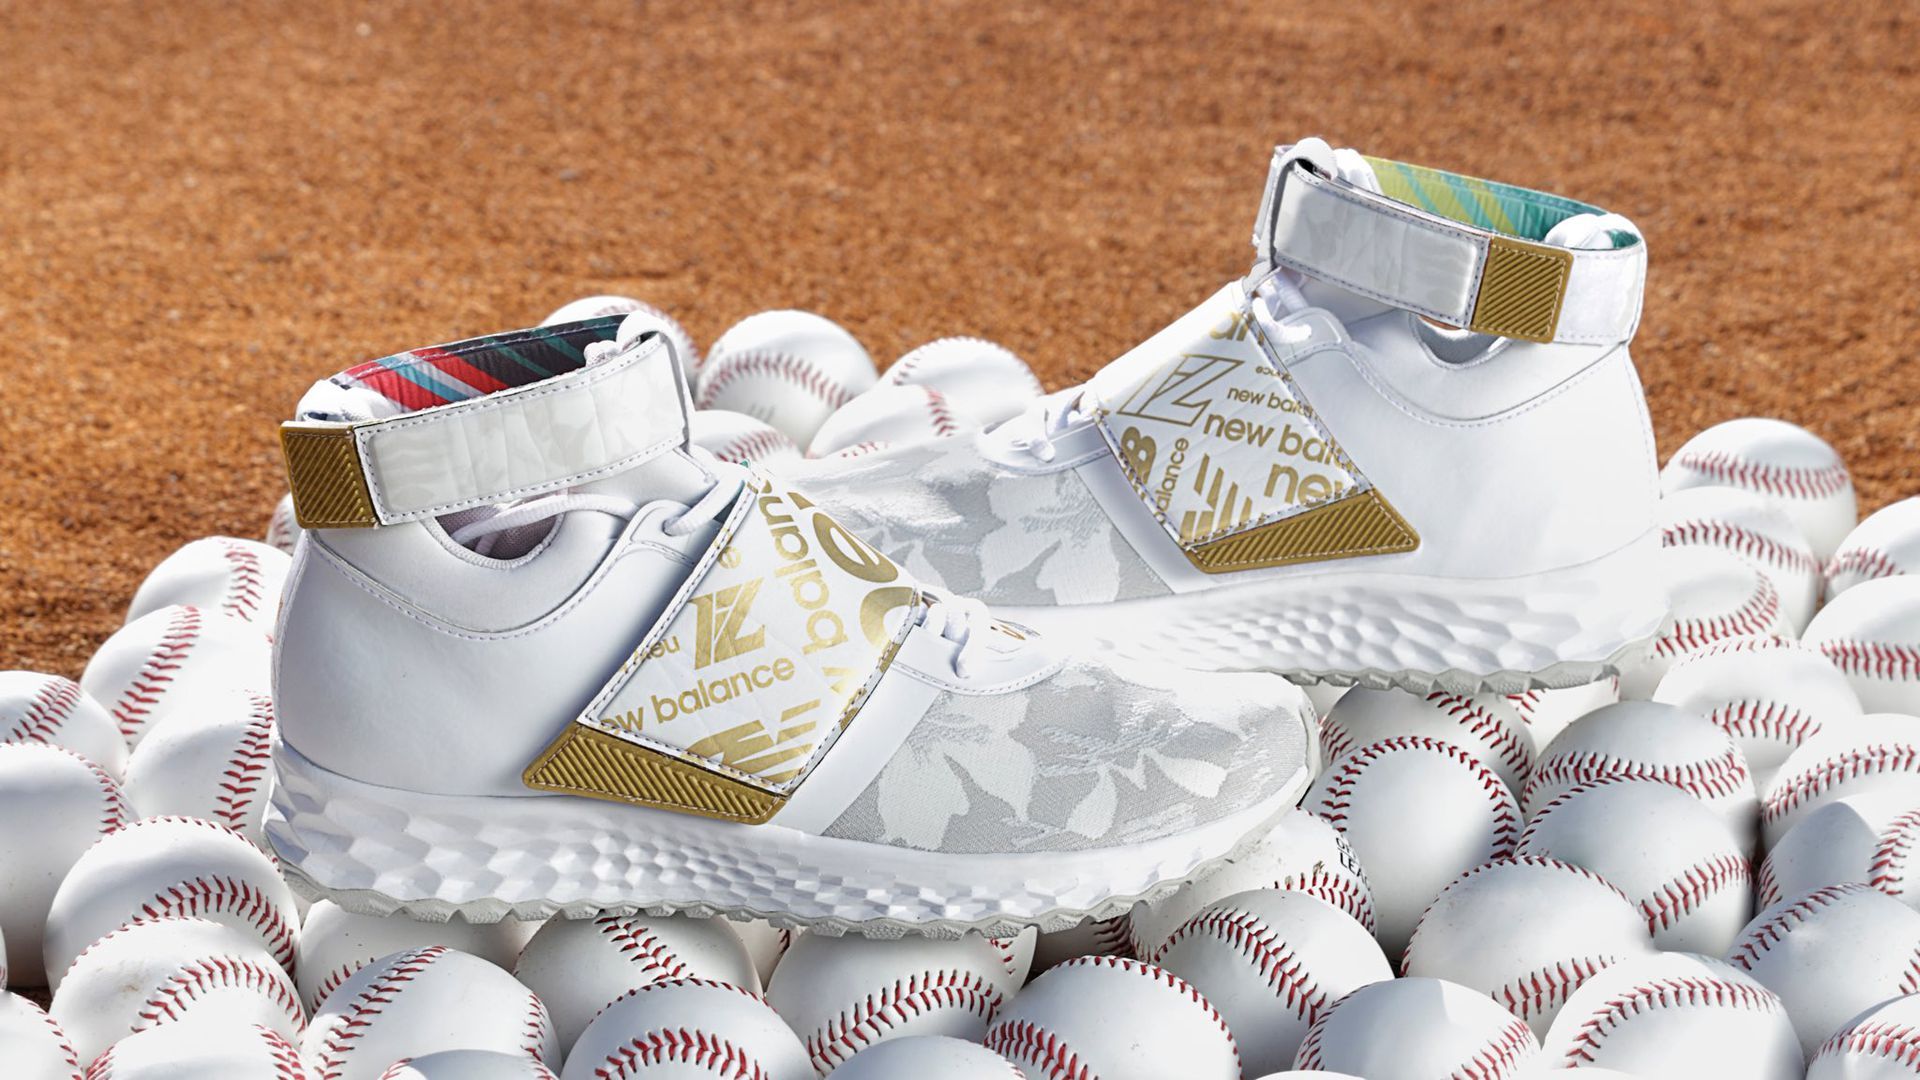 Picture of sneakers placed on top of several baseballs